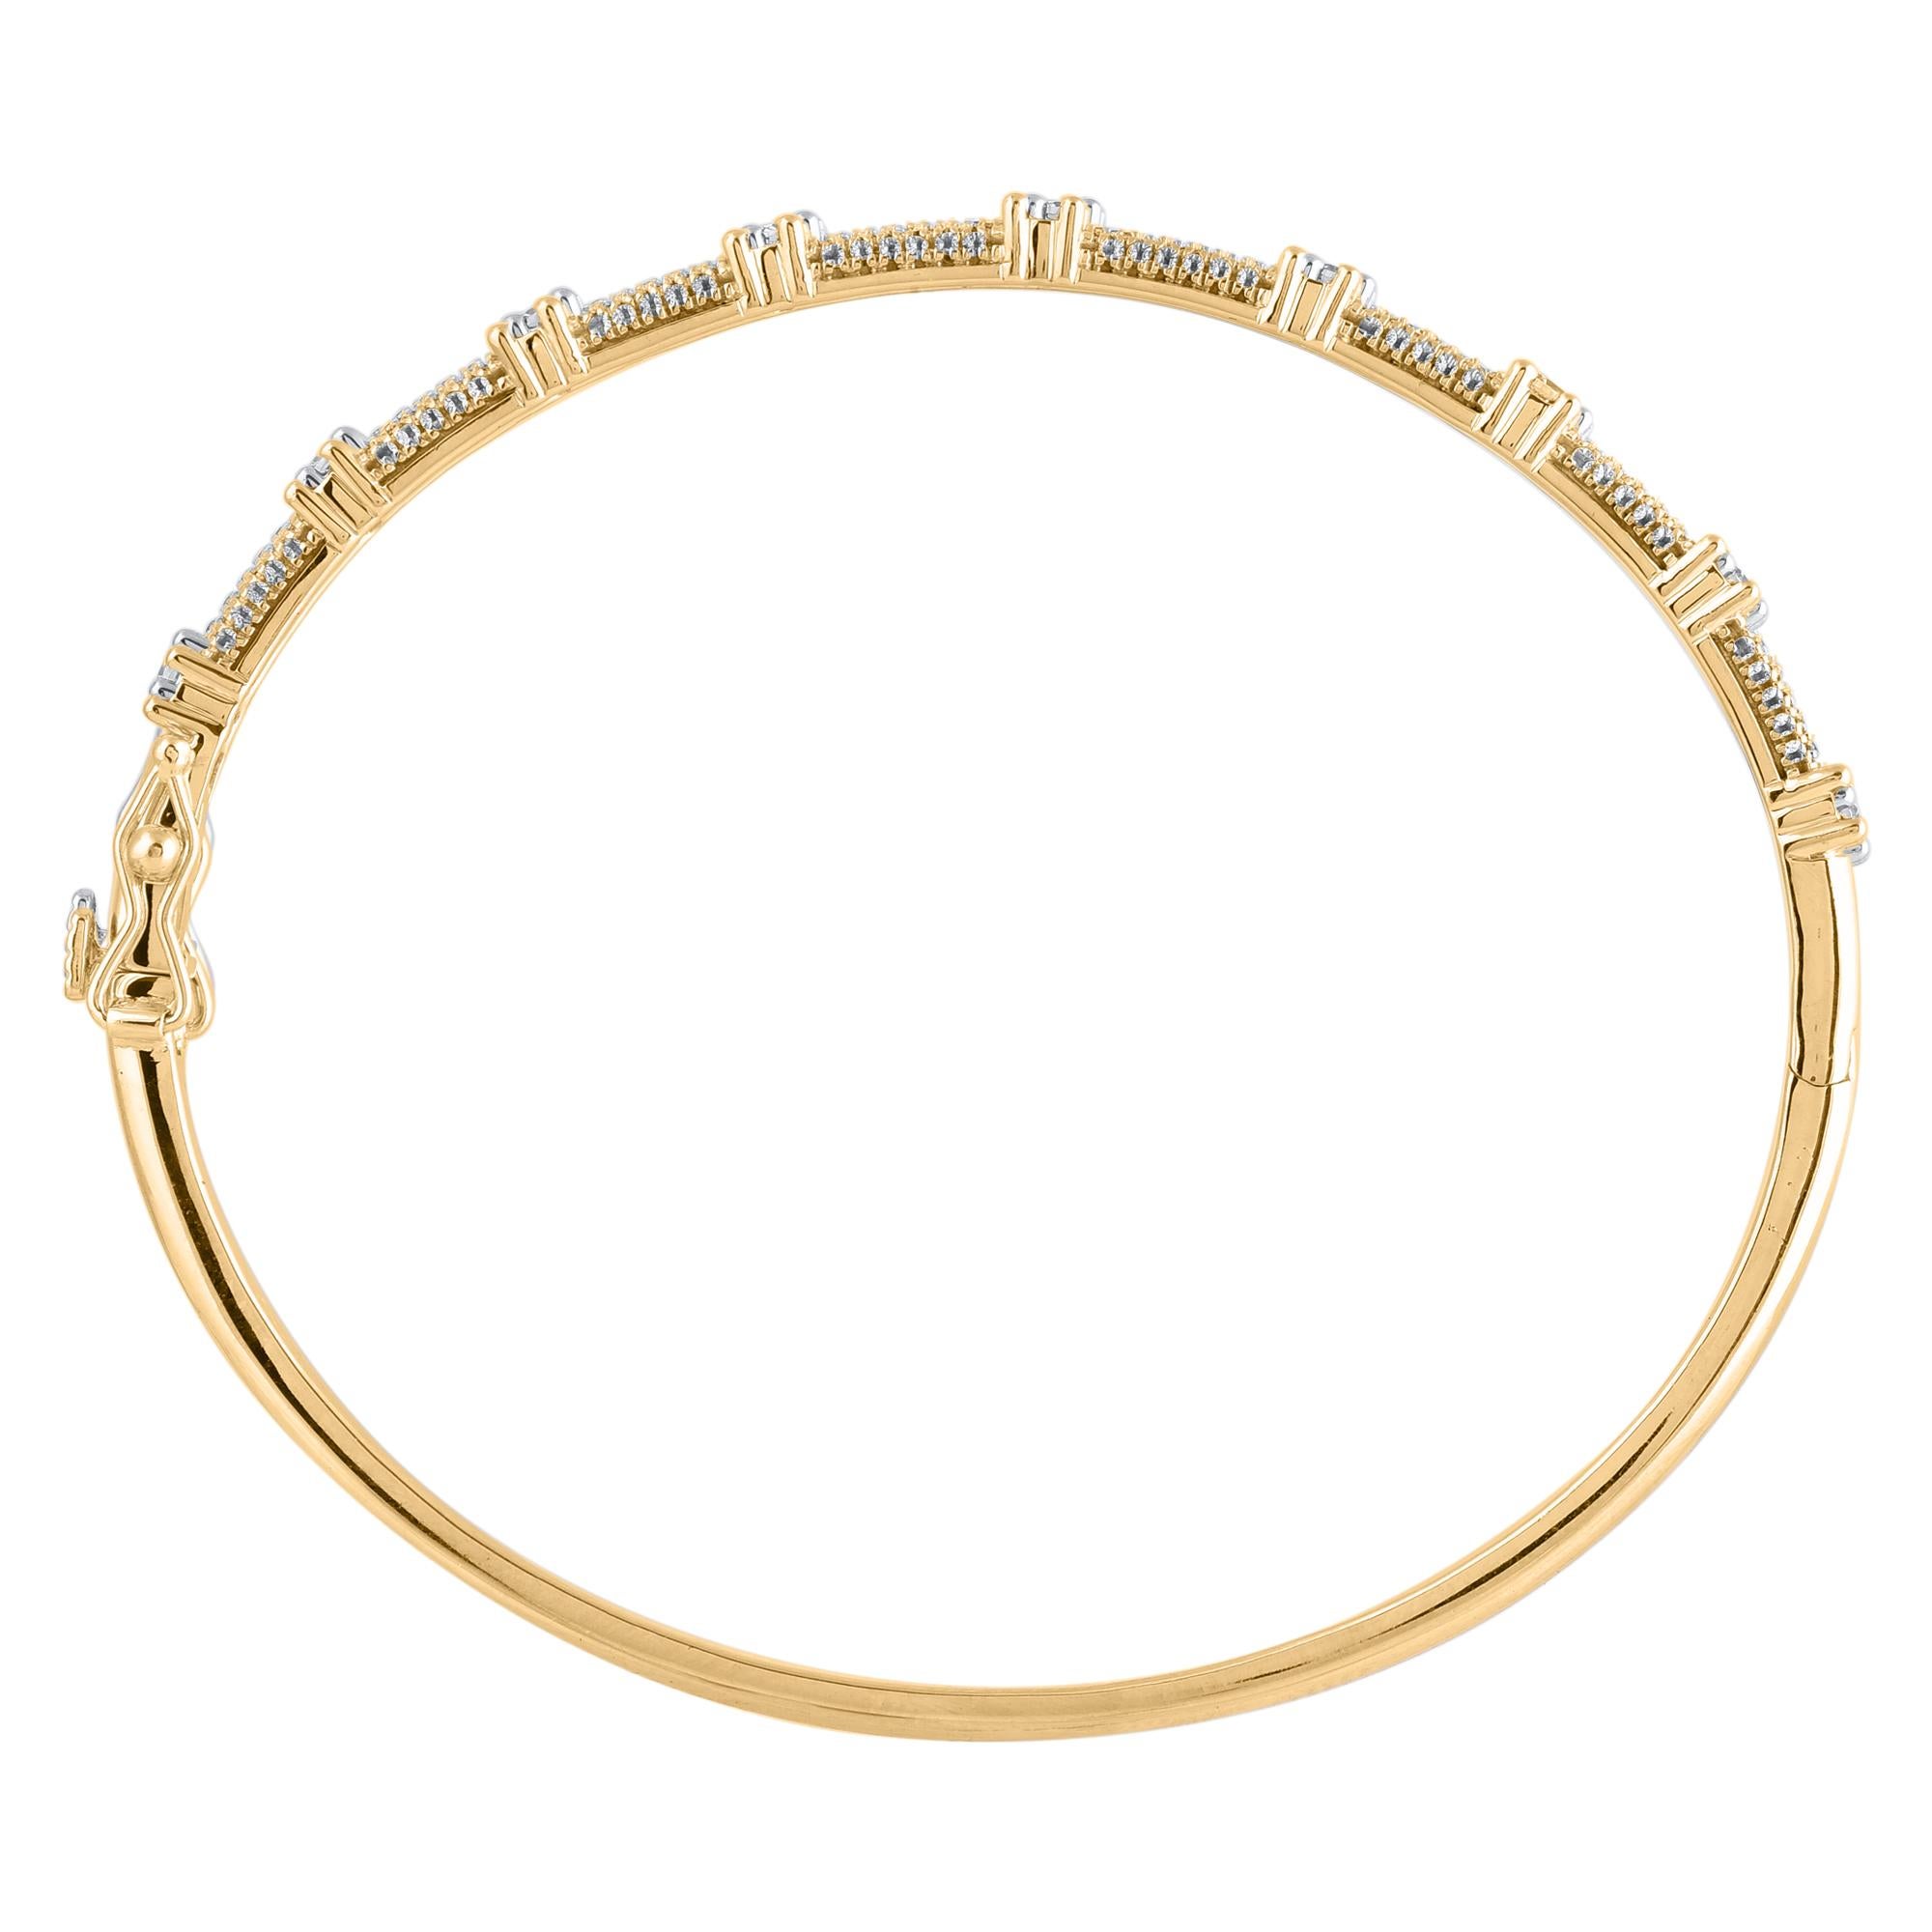 Express your sophisticated style with this gorgeous diamond bangle bracelet. This Shimmering bangle bracelet features 143 natural round single cut and brilliant cut diamonds in prong setting and crafted in 18kt yellow gold. Diamonds are graded H-I